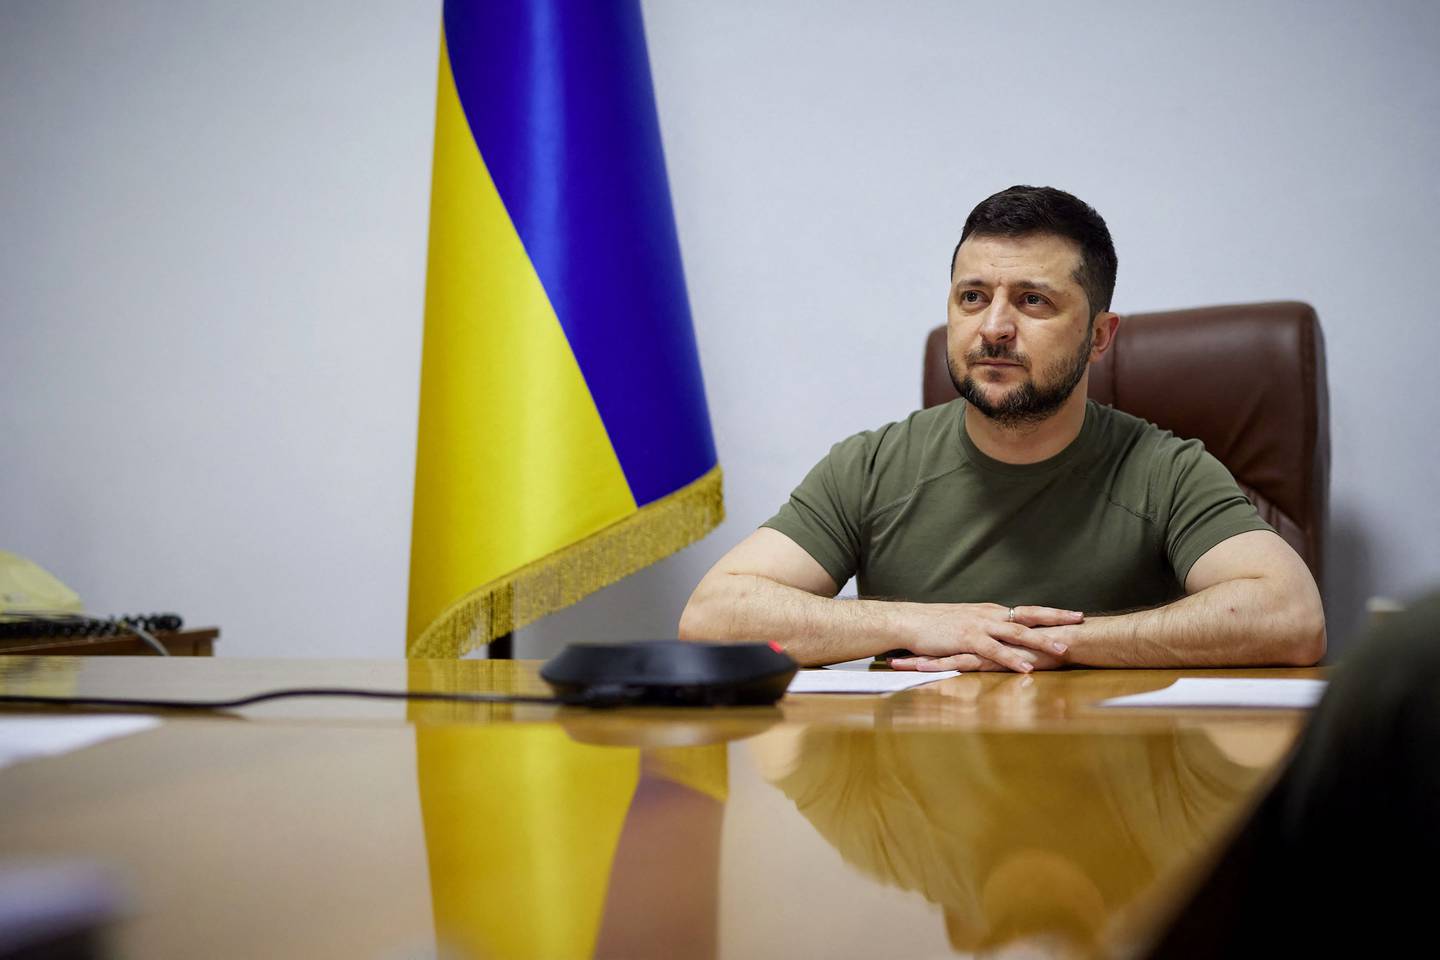 At the beginning of the war Ukrainian President Volodymyr Zelenskyy believed Roman Abramovich could play a key role in peace talks.
Photo: Ukrainian presidential press-service/AFP